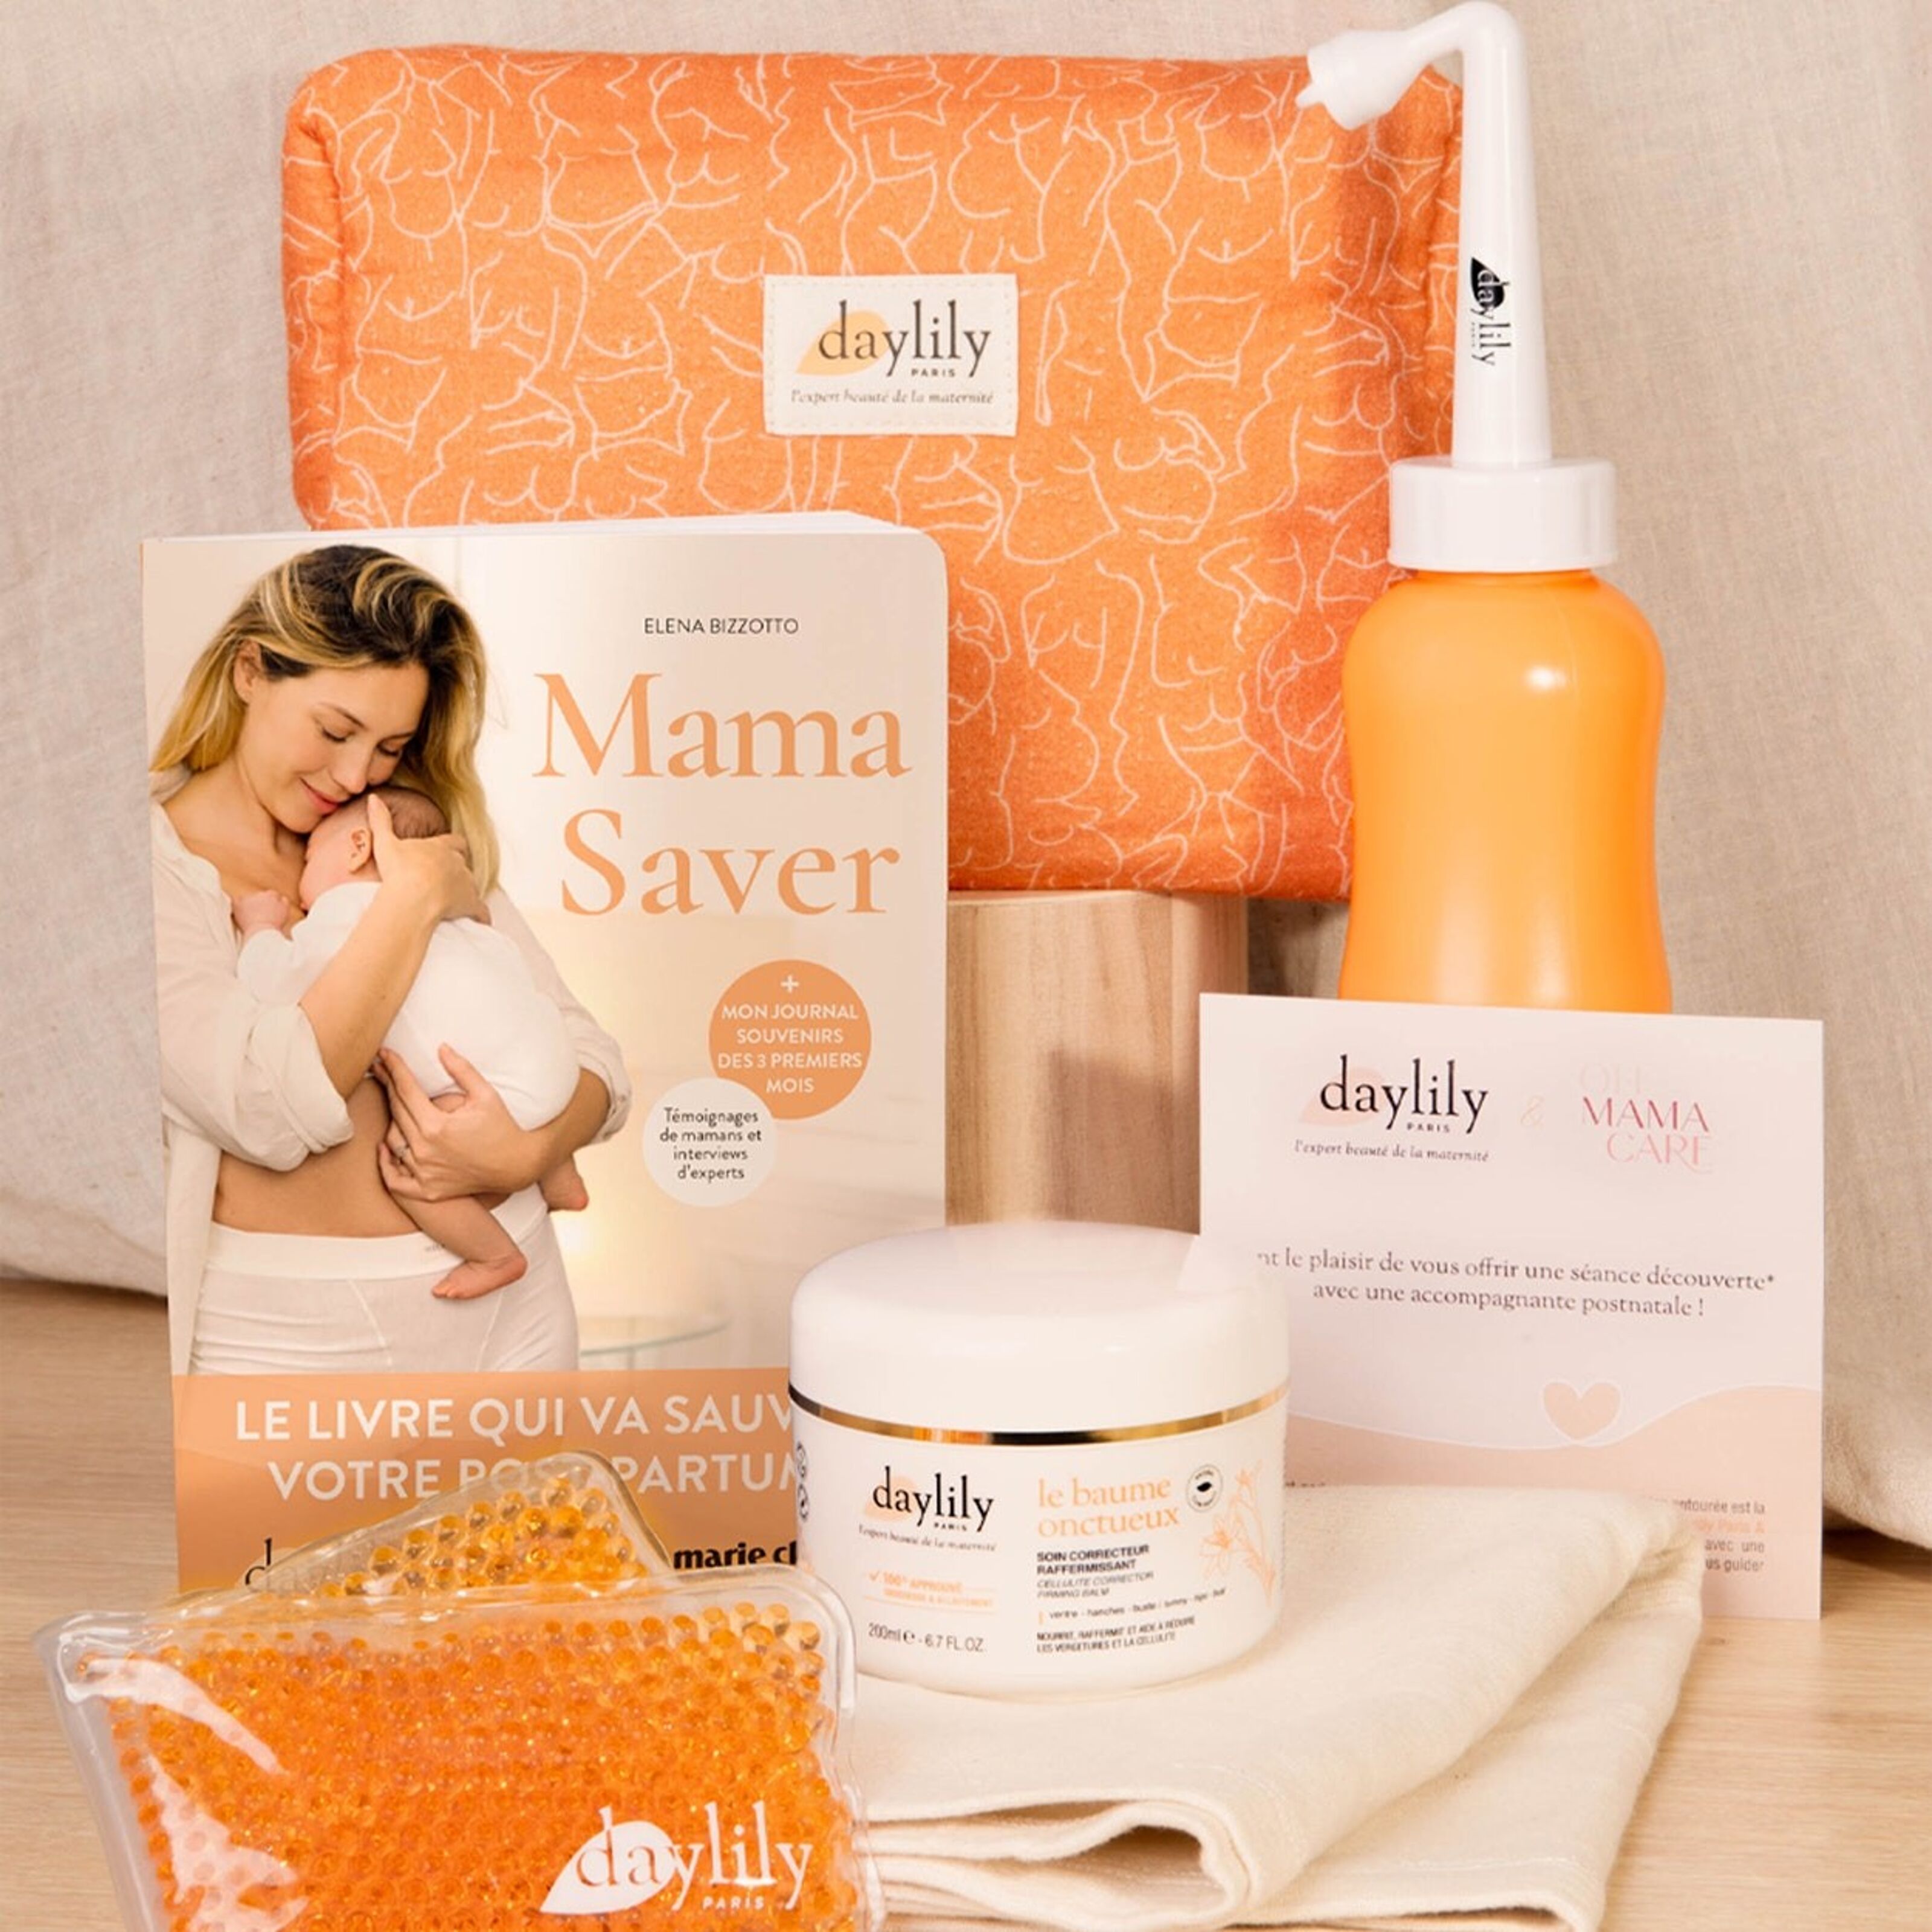 Daylily anti-cellulite body care during pregnancy – Daylily Paris